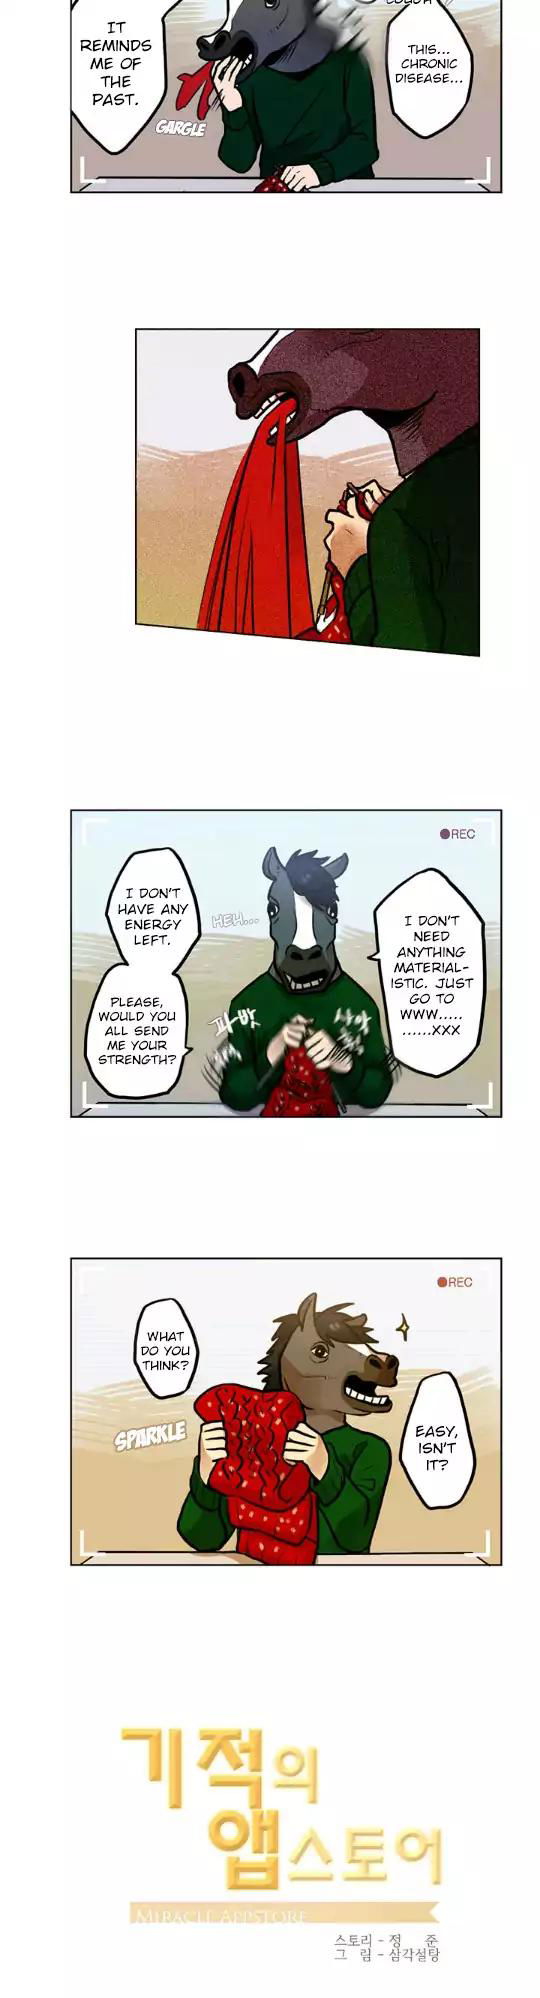 Miracle App Store Chapter 5 page 10